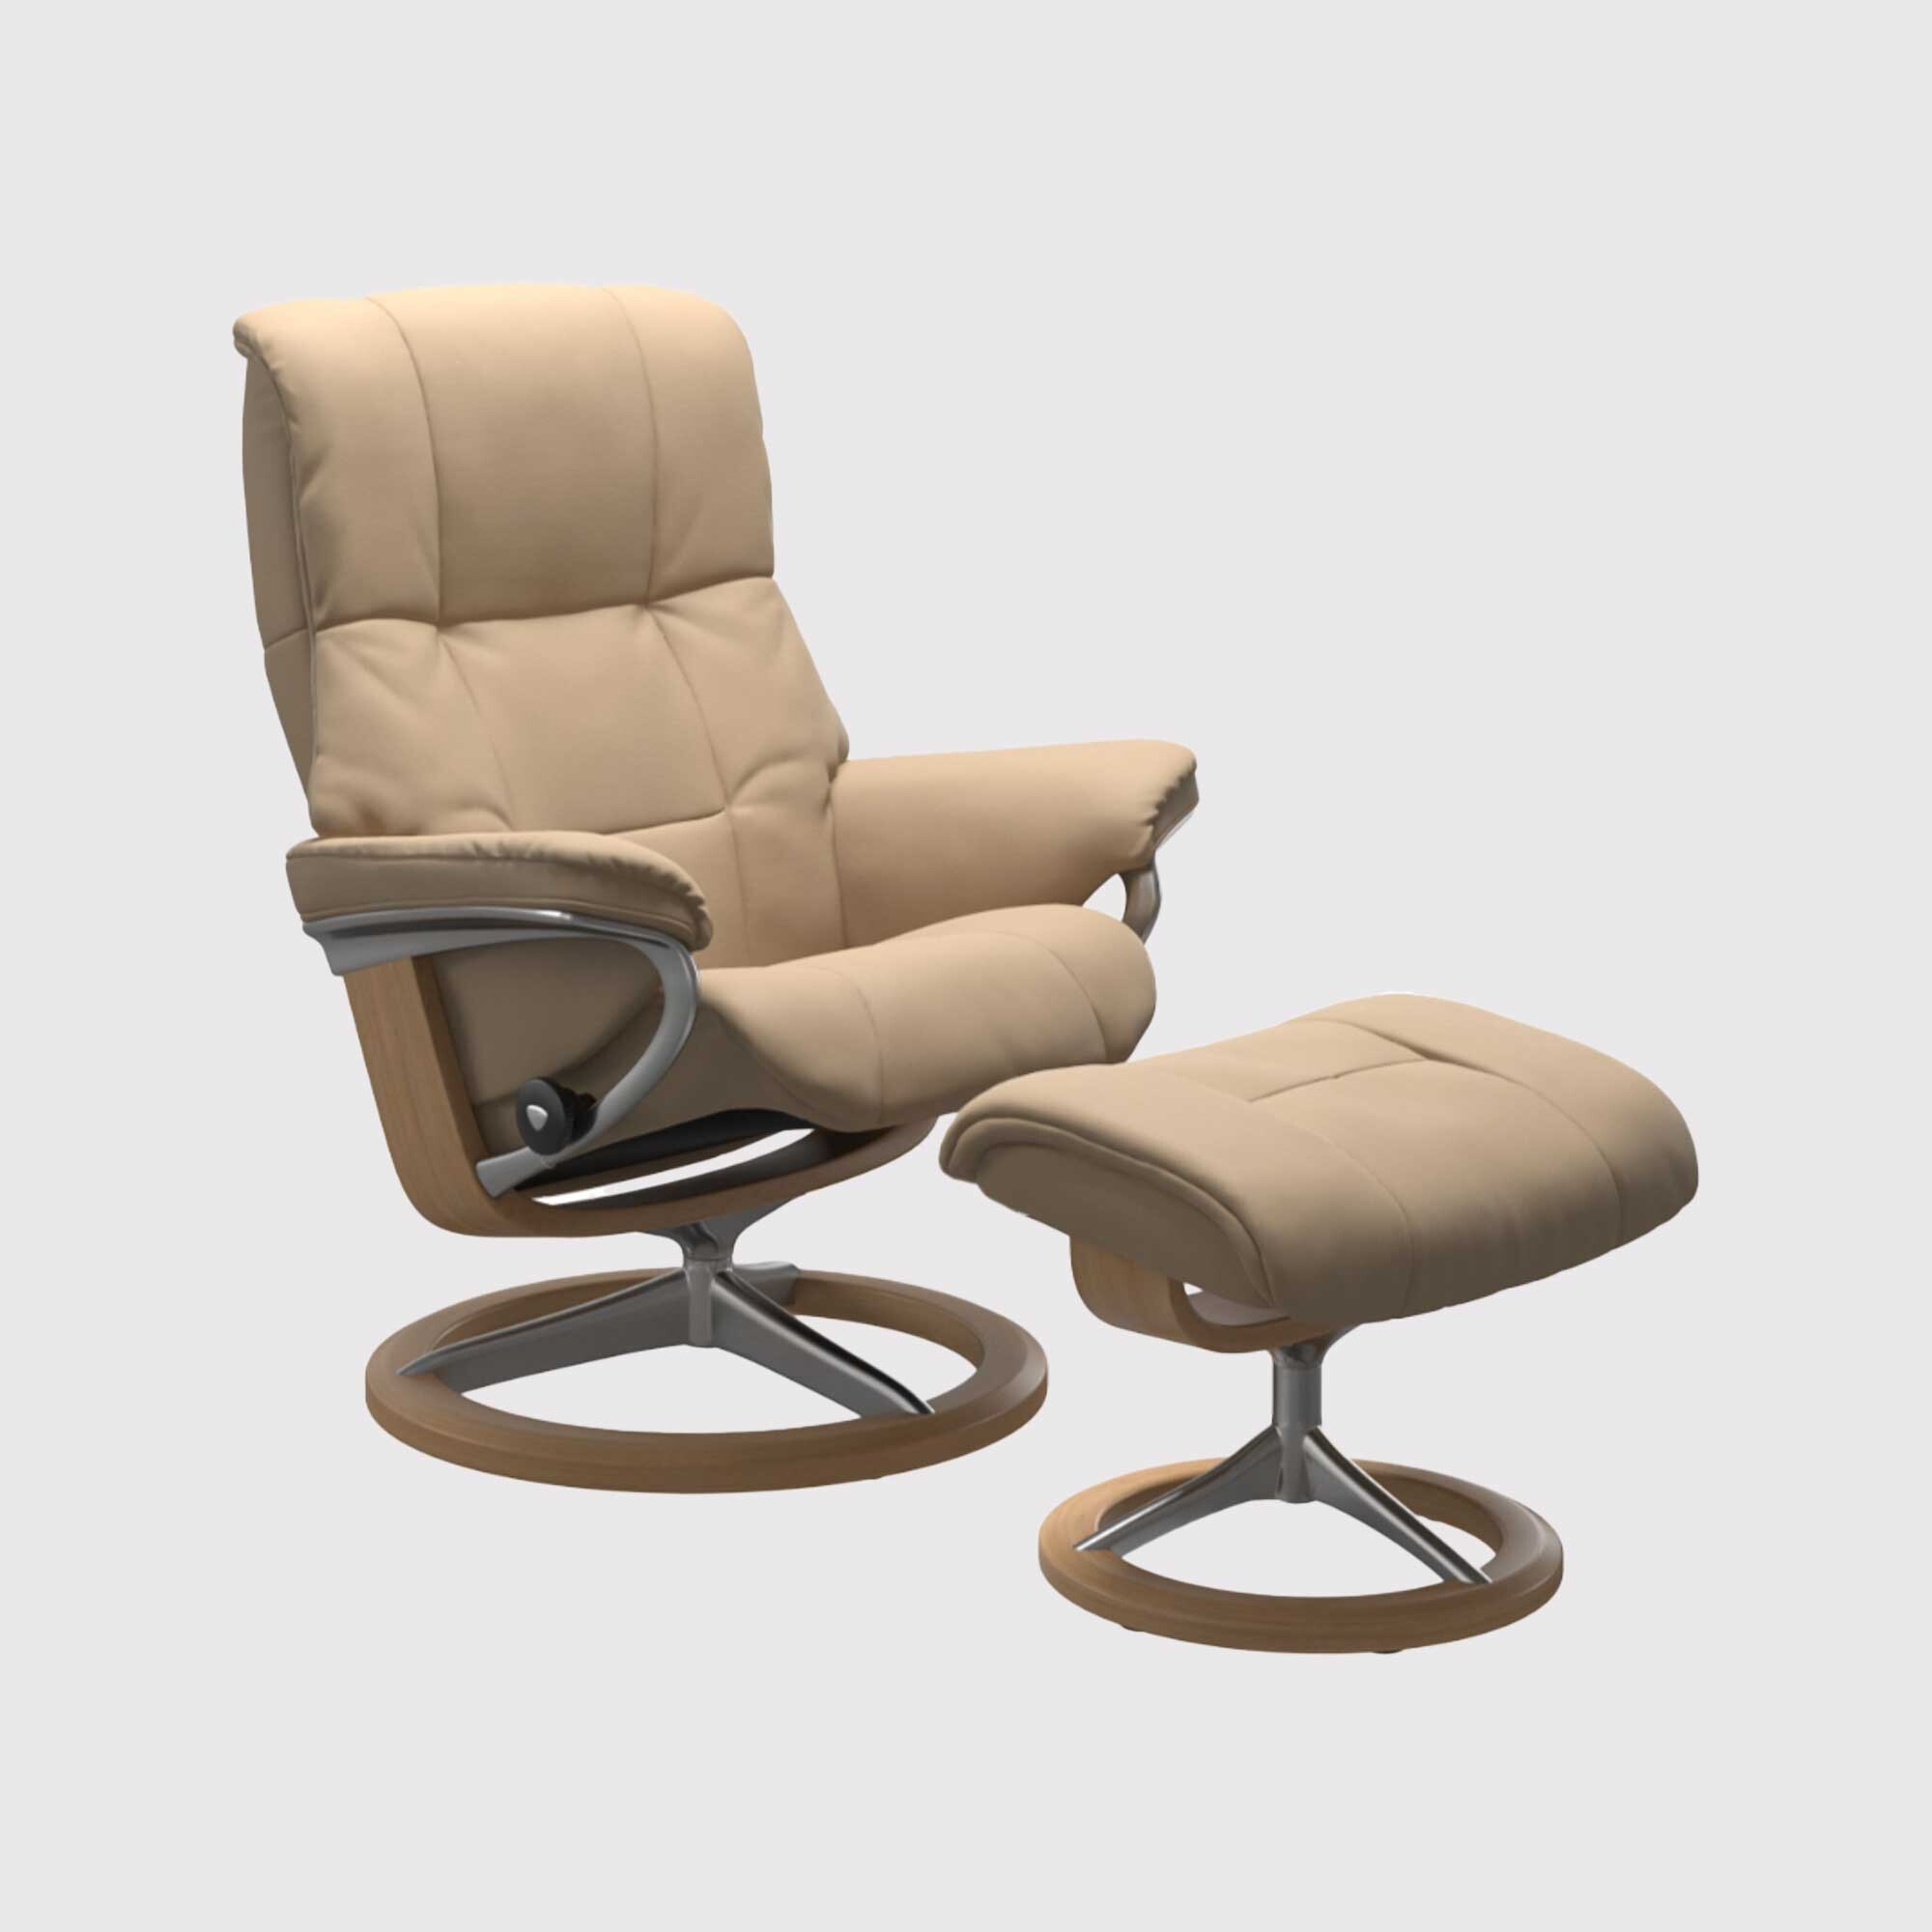 Stressless Mayfair Large Signature Recliner Chair w/footstool, Neutral | Barker & Stonehouse